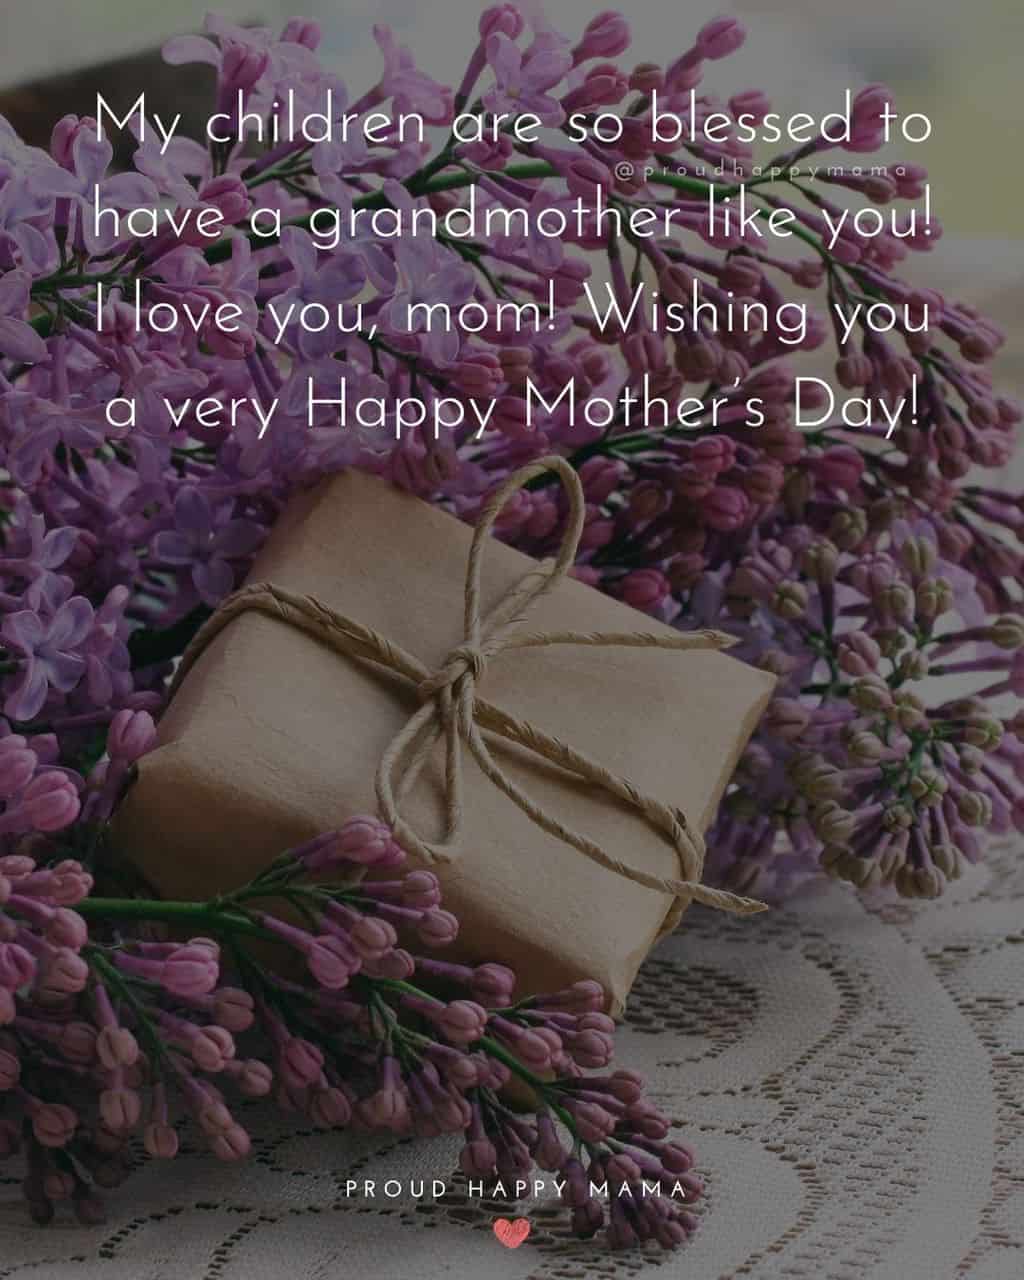 Happy Mothers Day Quotes To Grandma - My children are so blessed to have a grandmother like you! I love you, mom!